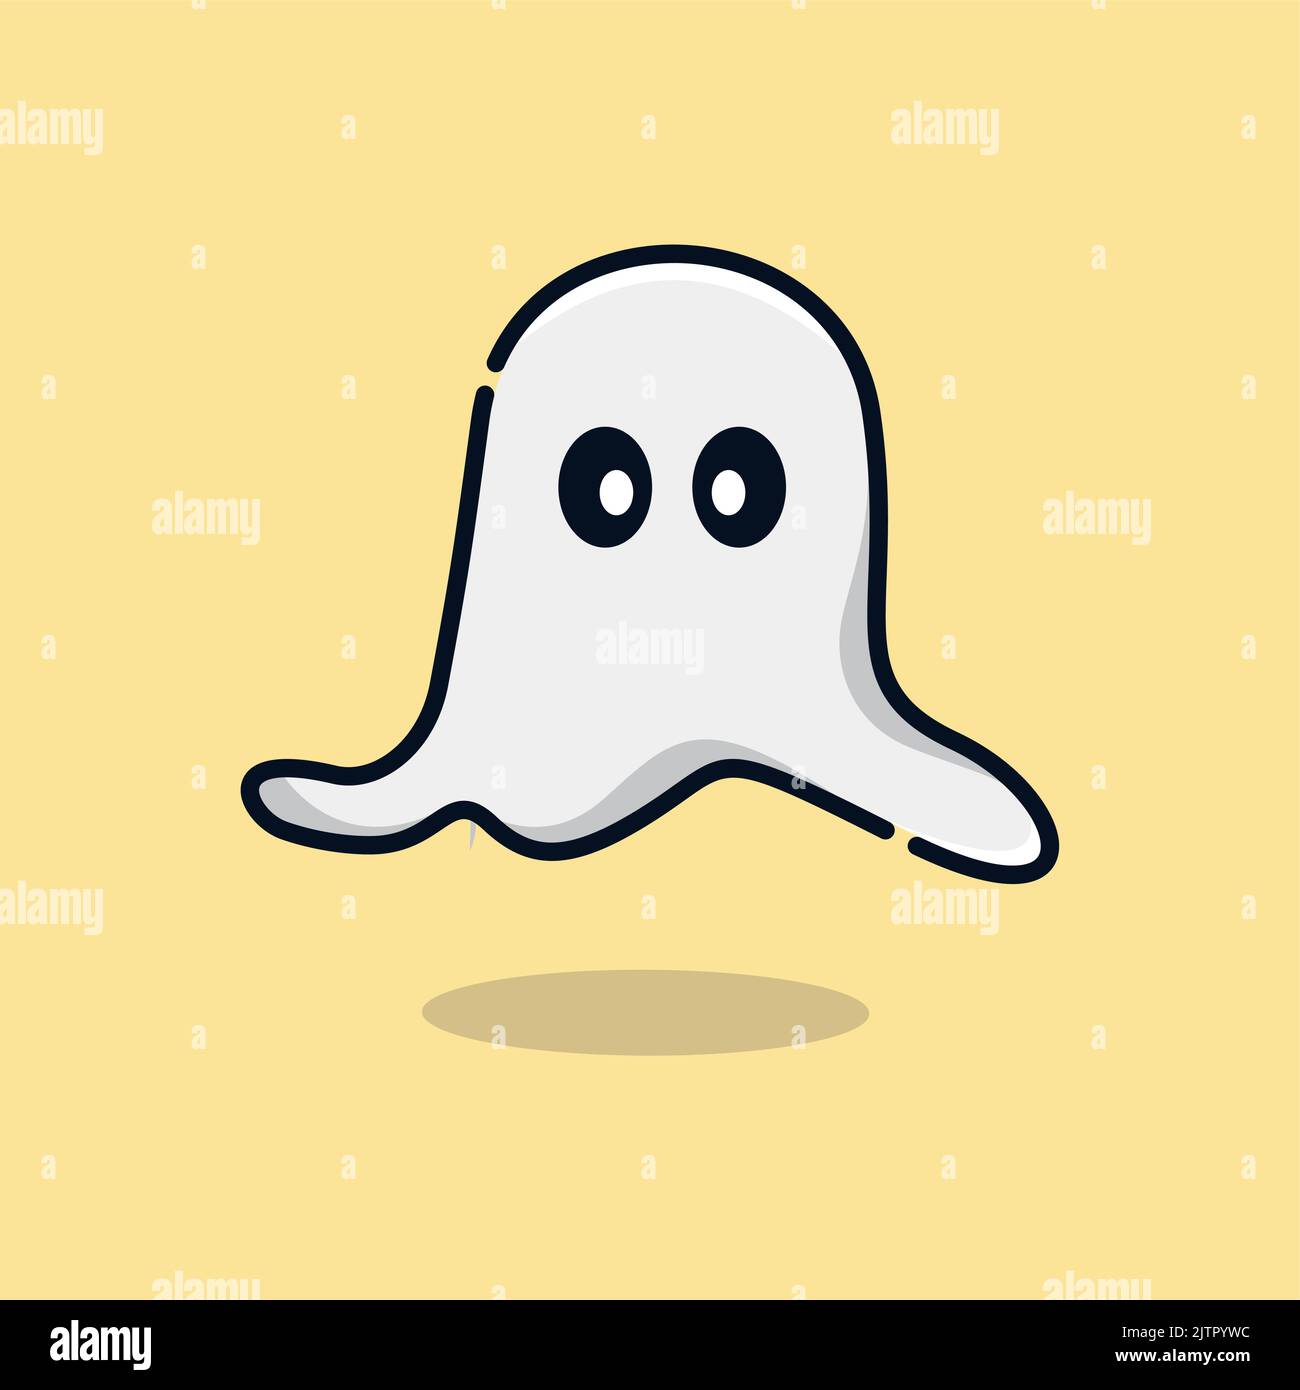 An illustration of a speechless floating ghost on a yellow background Stock Vector